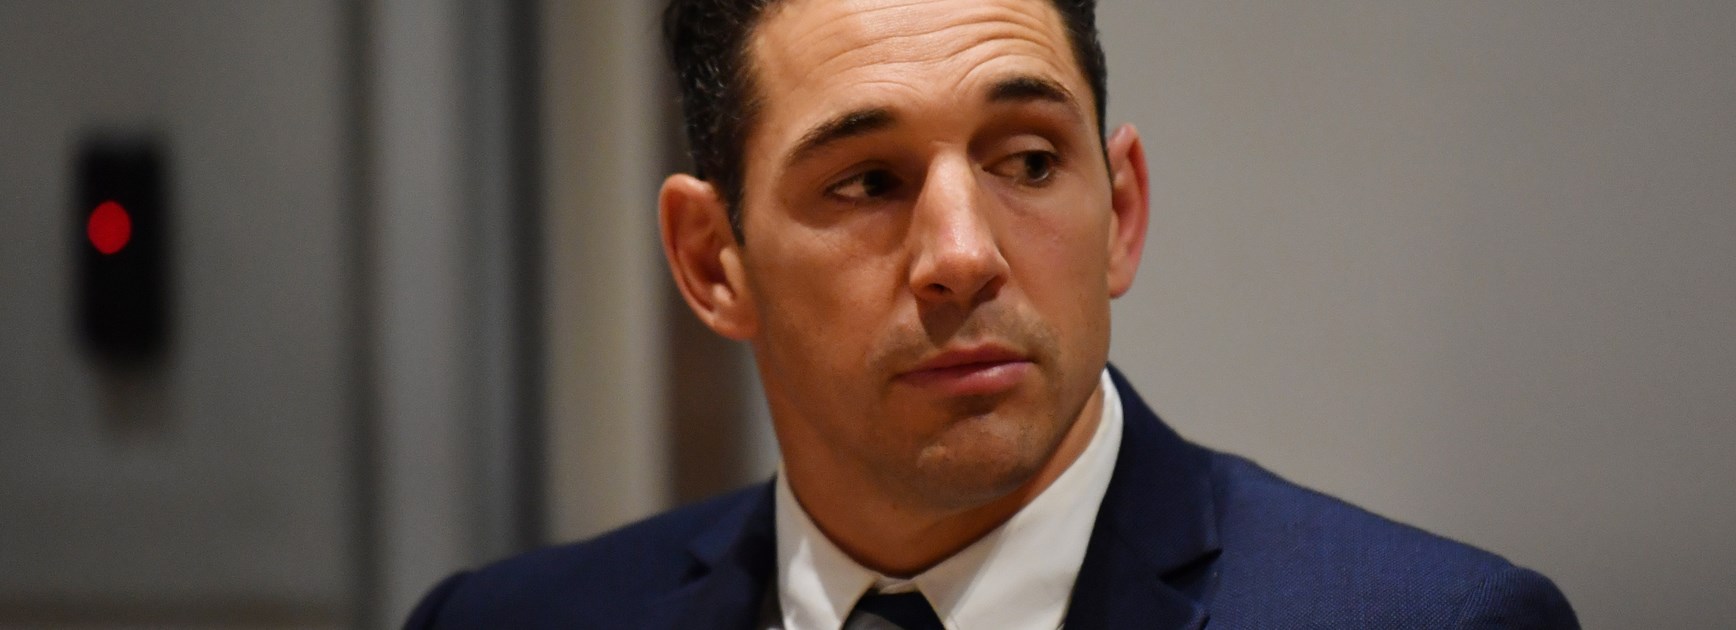 Billy Slater at the judiciary on Tuesday.